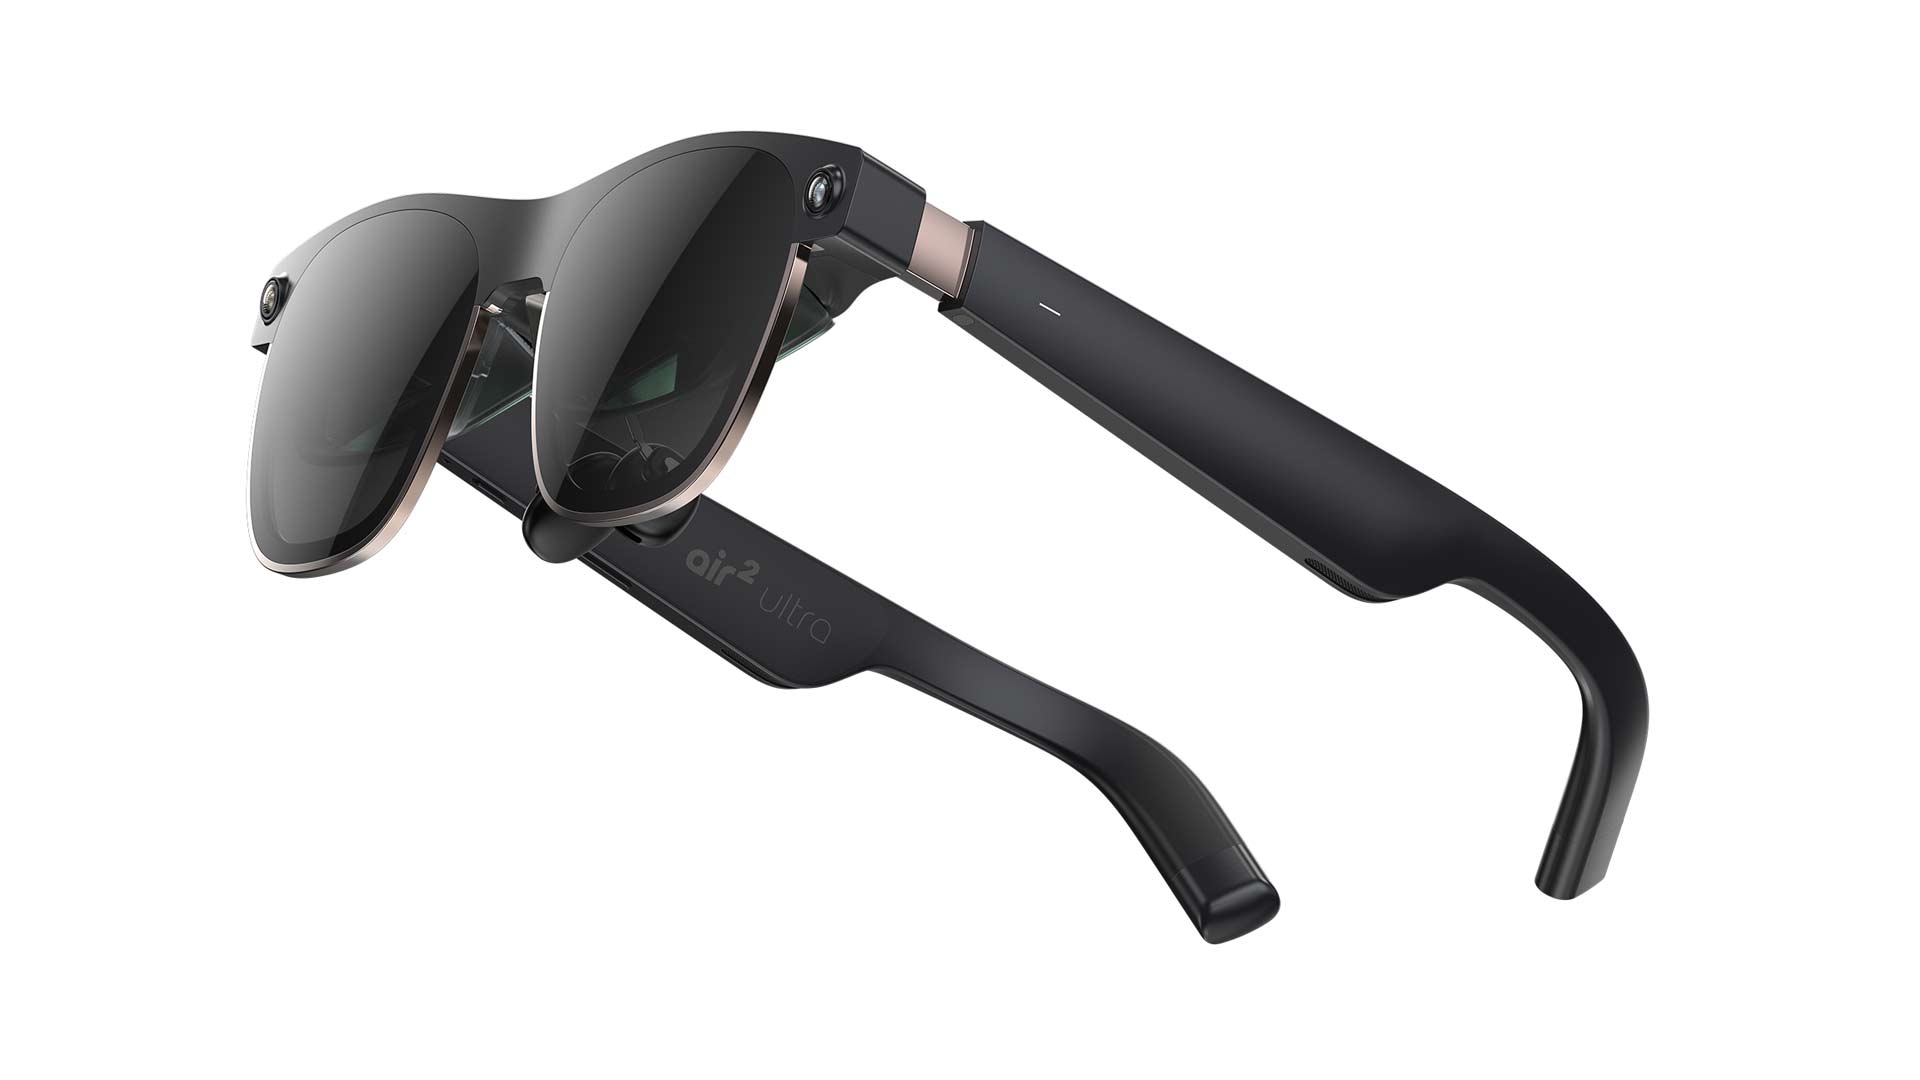 Xreal Announces Air 2 Ultra AR Glasses Ahead of Apple Vision Pro Launch